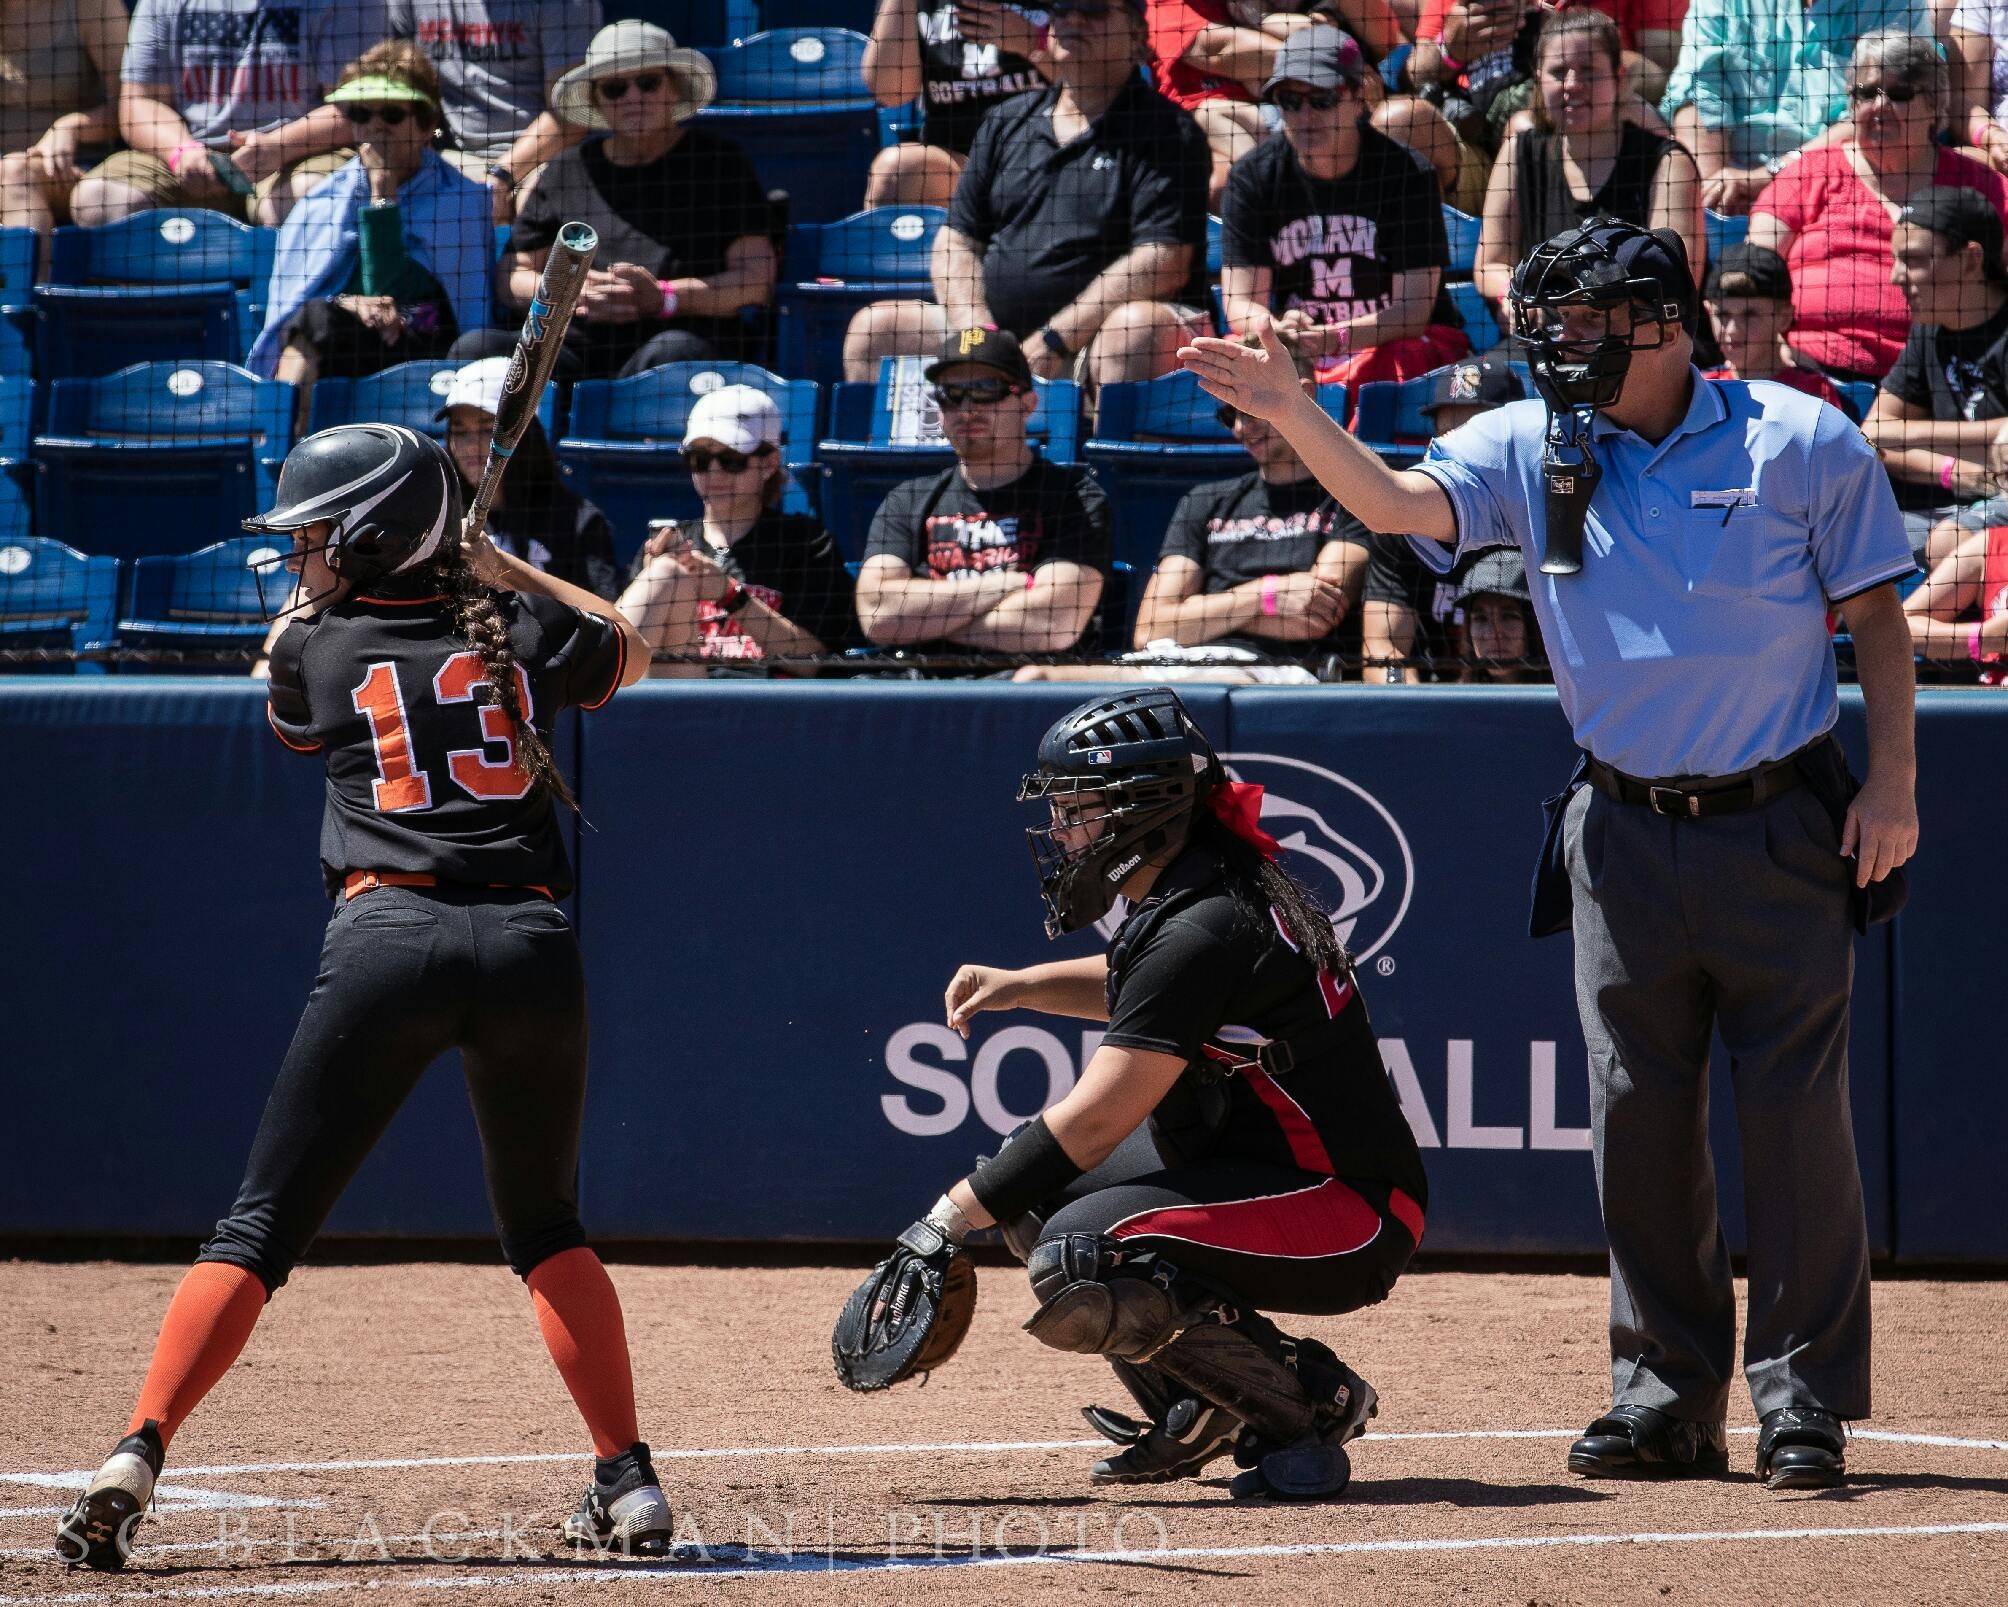 softball player on left preparing to swing bat with catcher to her right kneeling and the umpire further right pointing with his hand